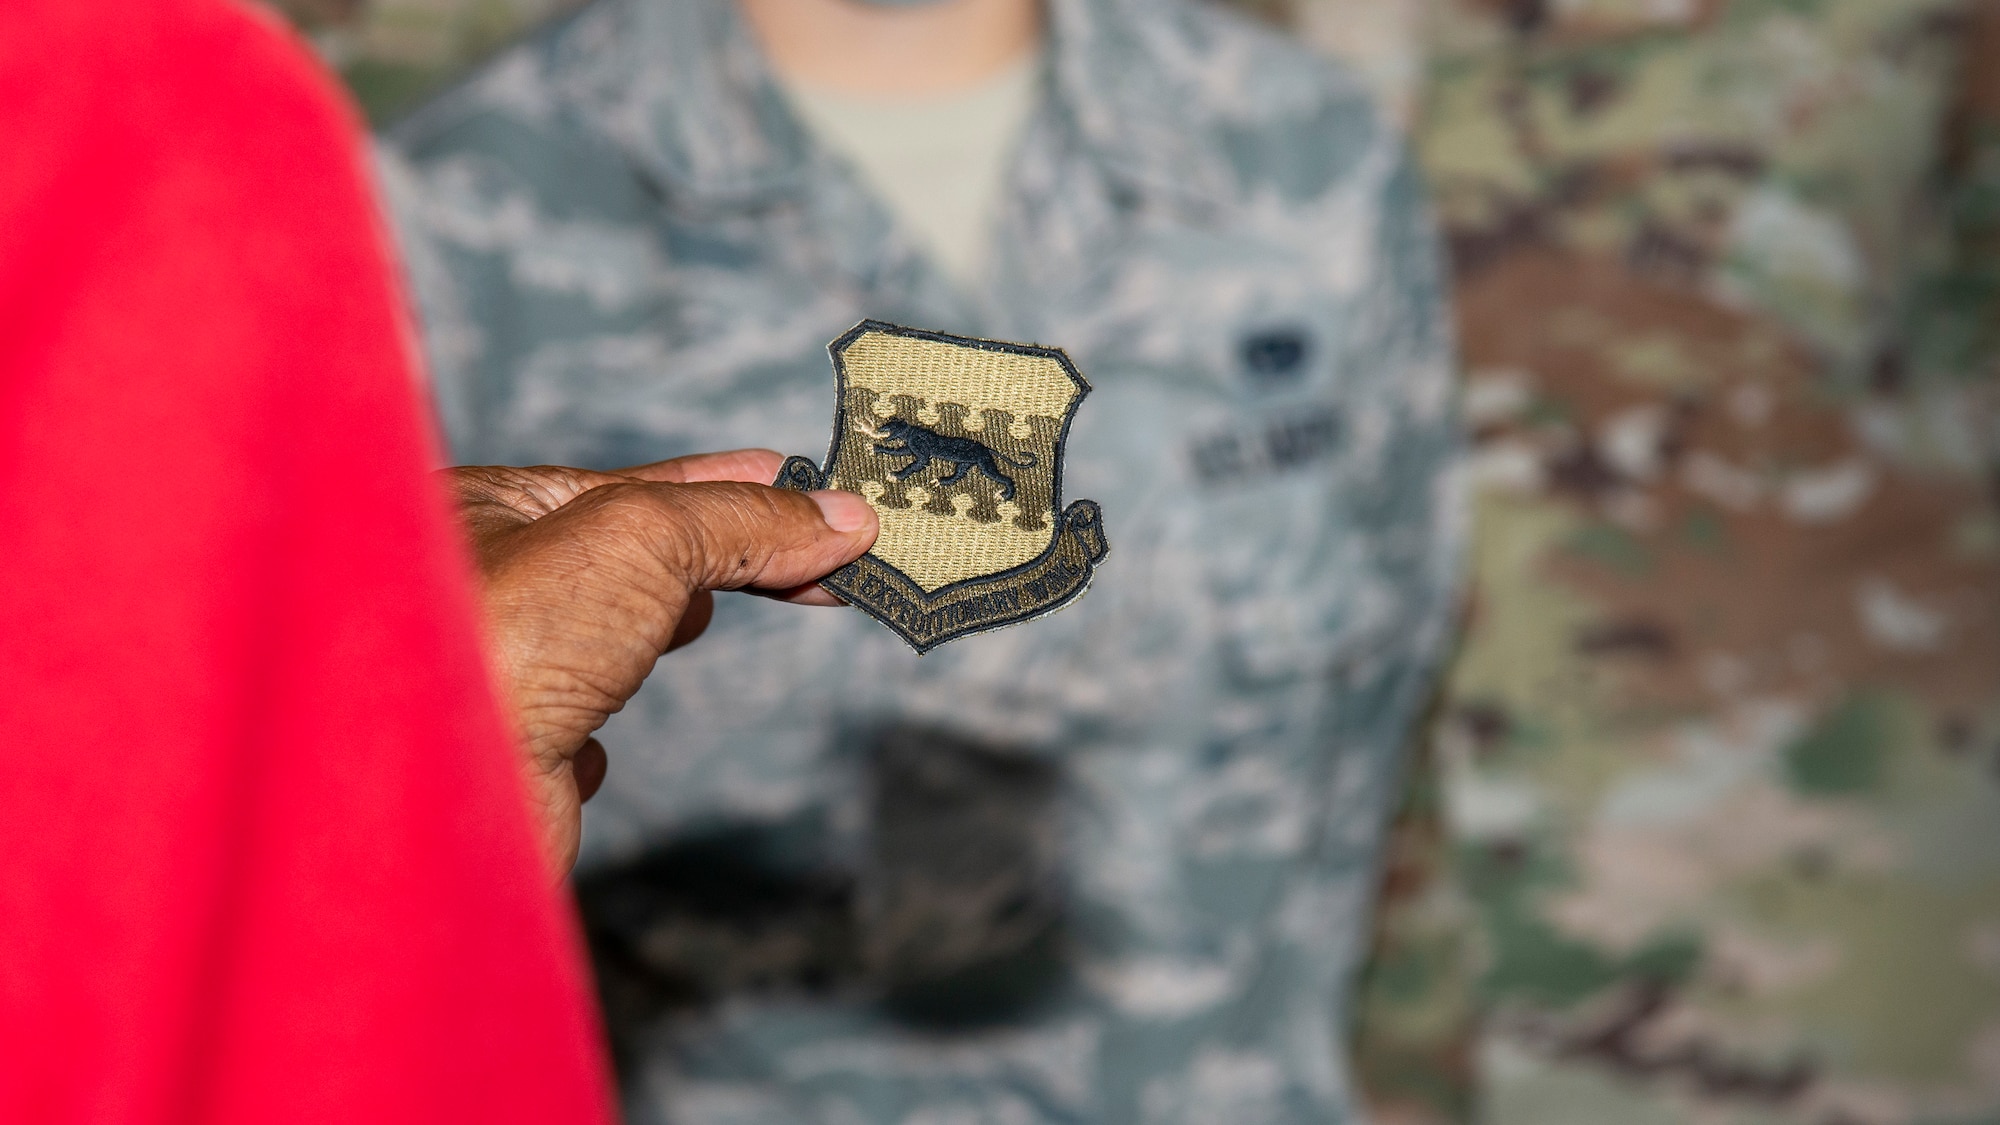 U.S. Army Air Forces Sgt. Thomas Newton, a Documented Original Tuskegee Airman, receives a 332nd Air Expeditionary Wing patch at MacDill Air Force Base, Fla., Nov. 10, 2020.